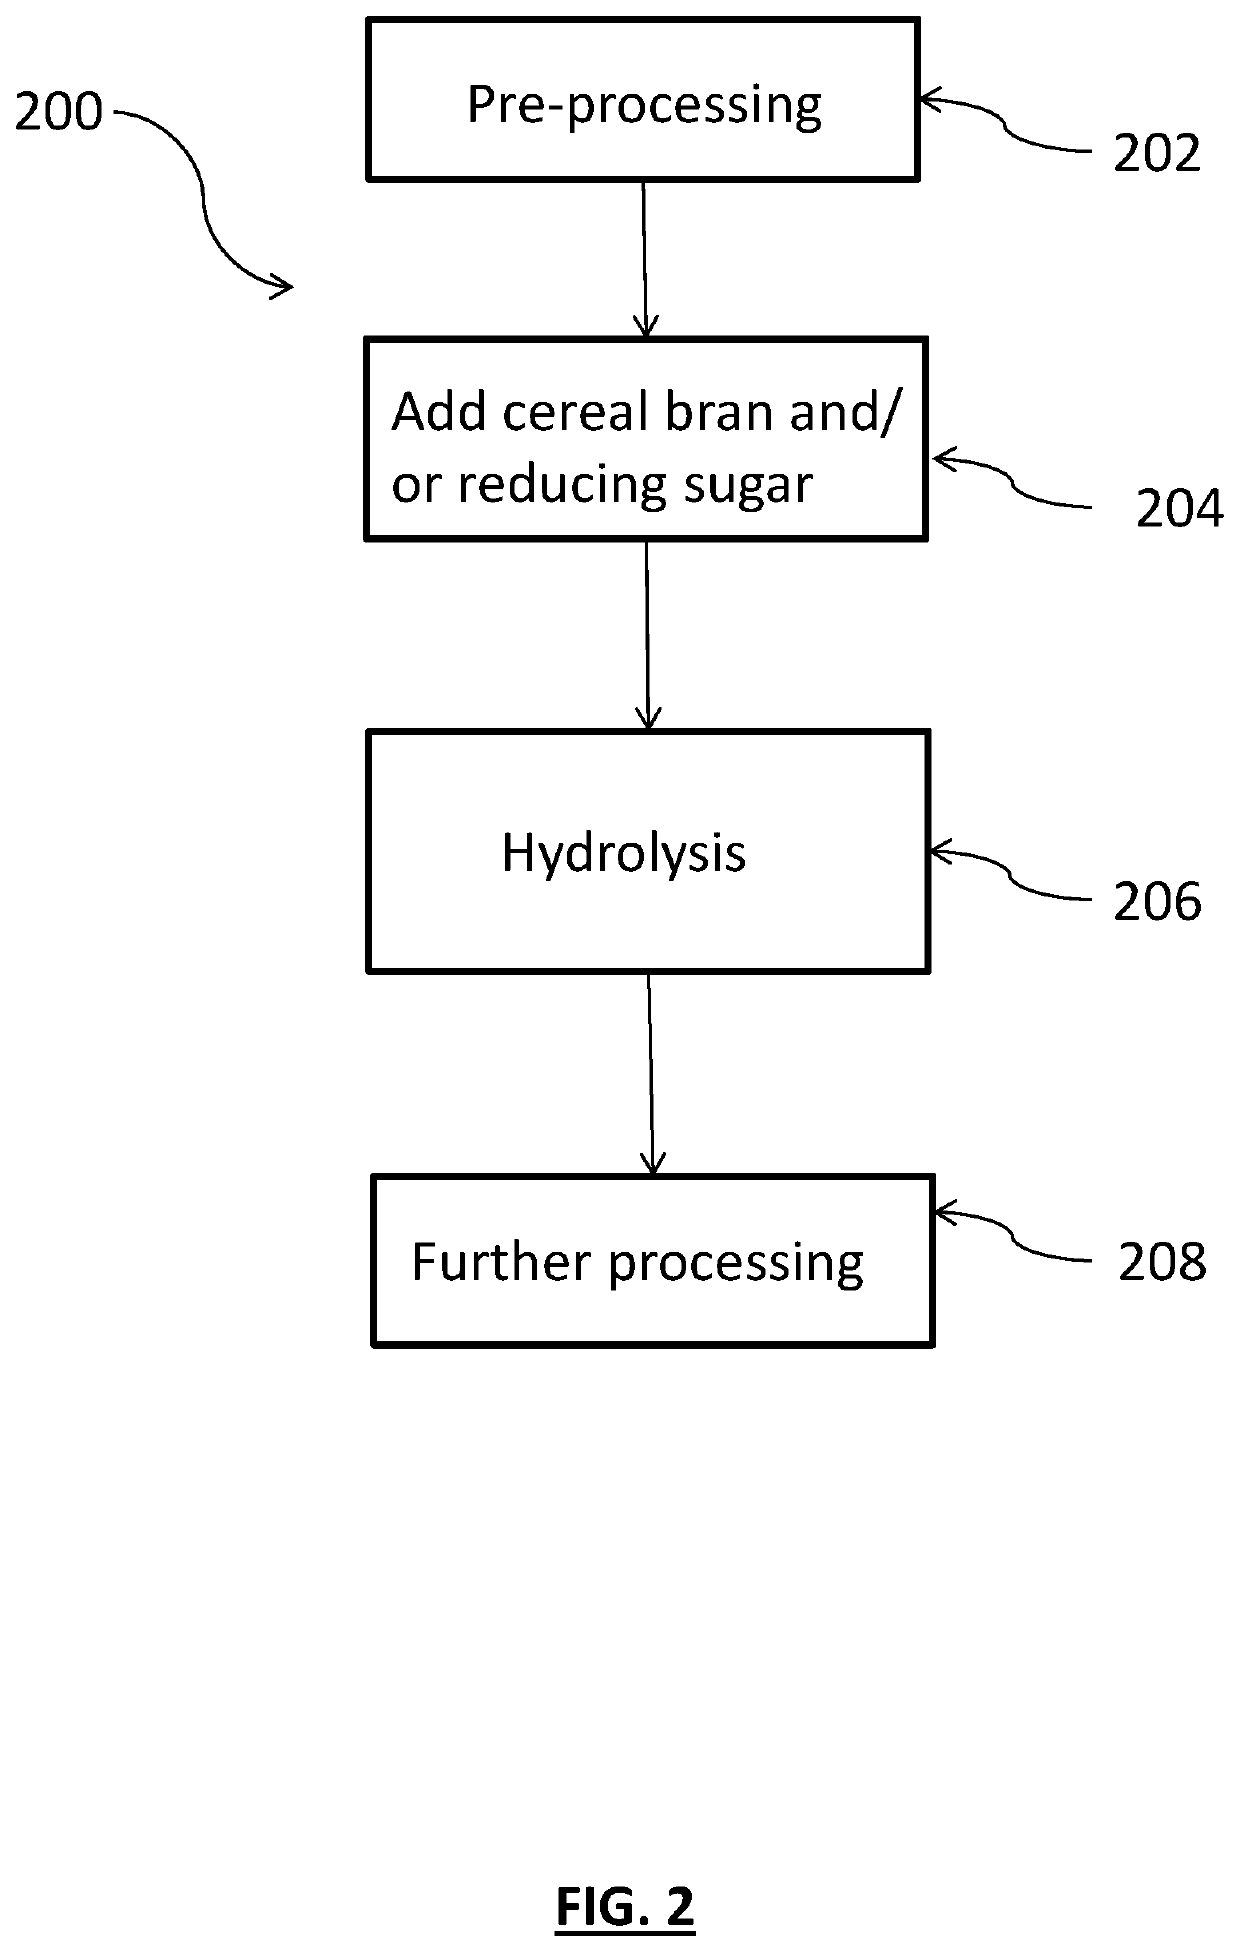 Methods for producing feather-based food products